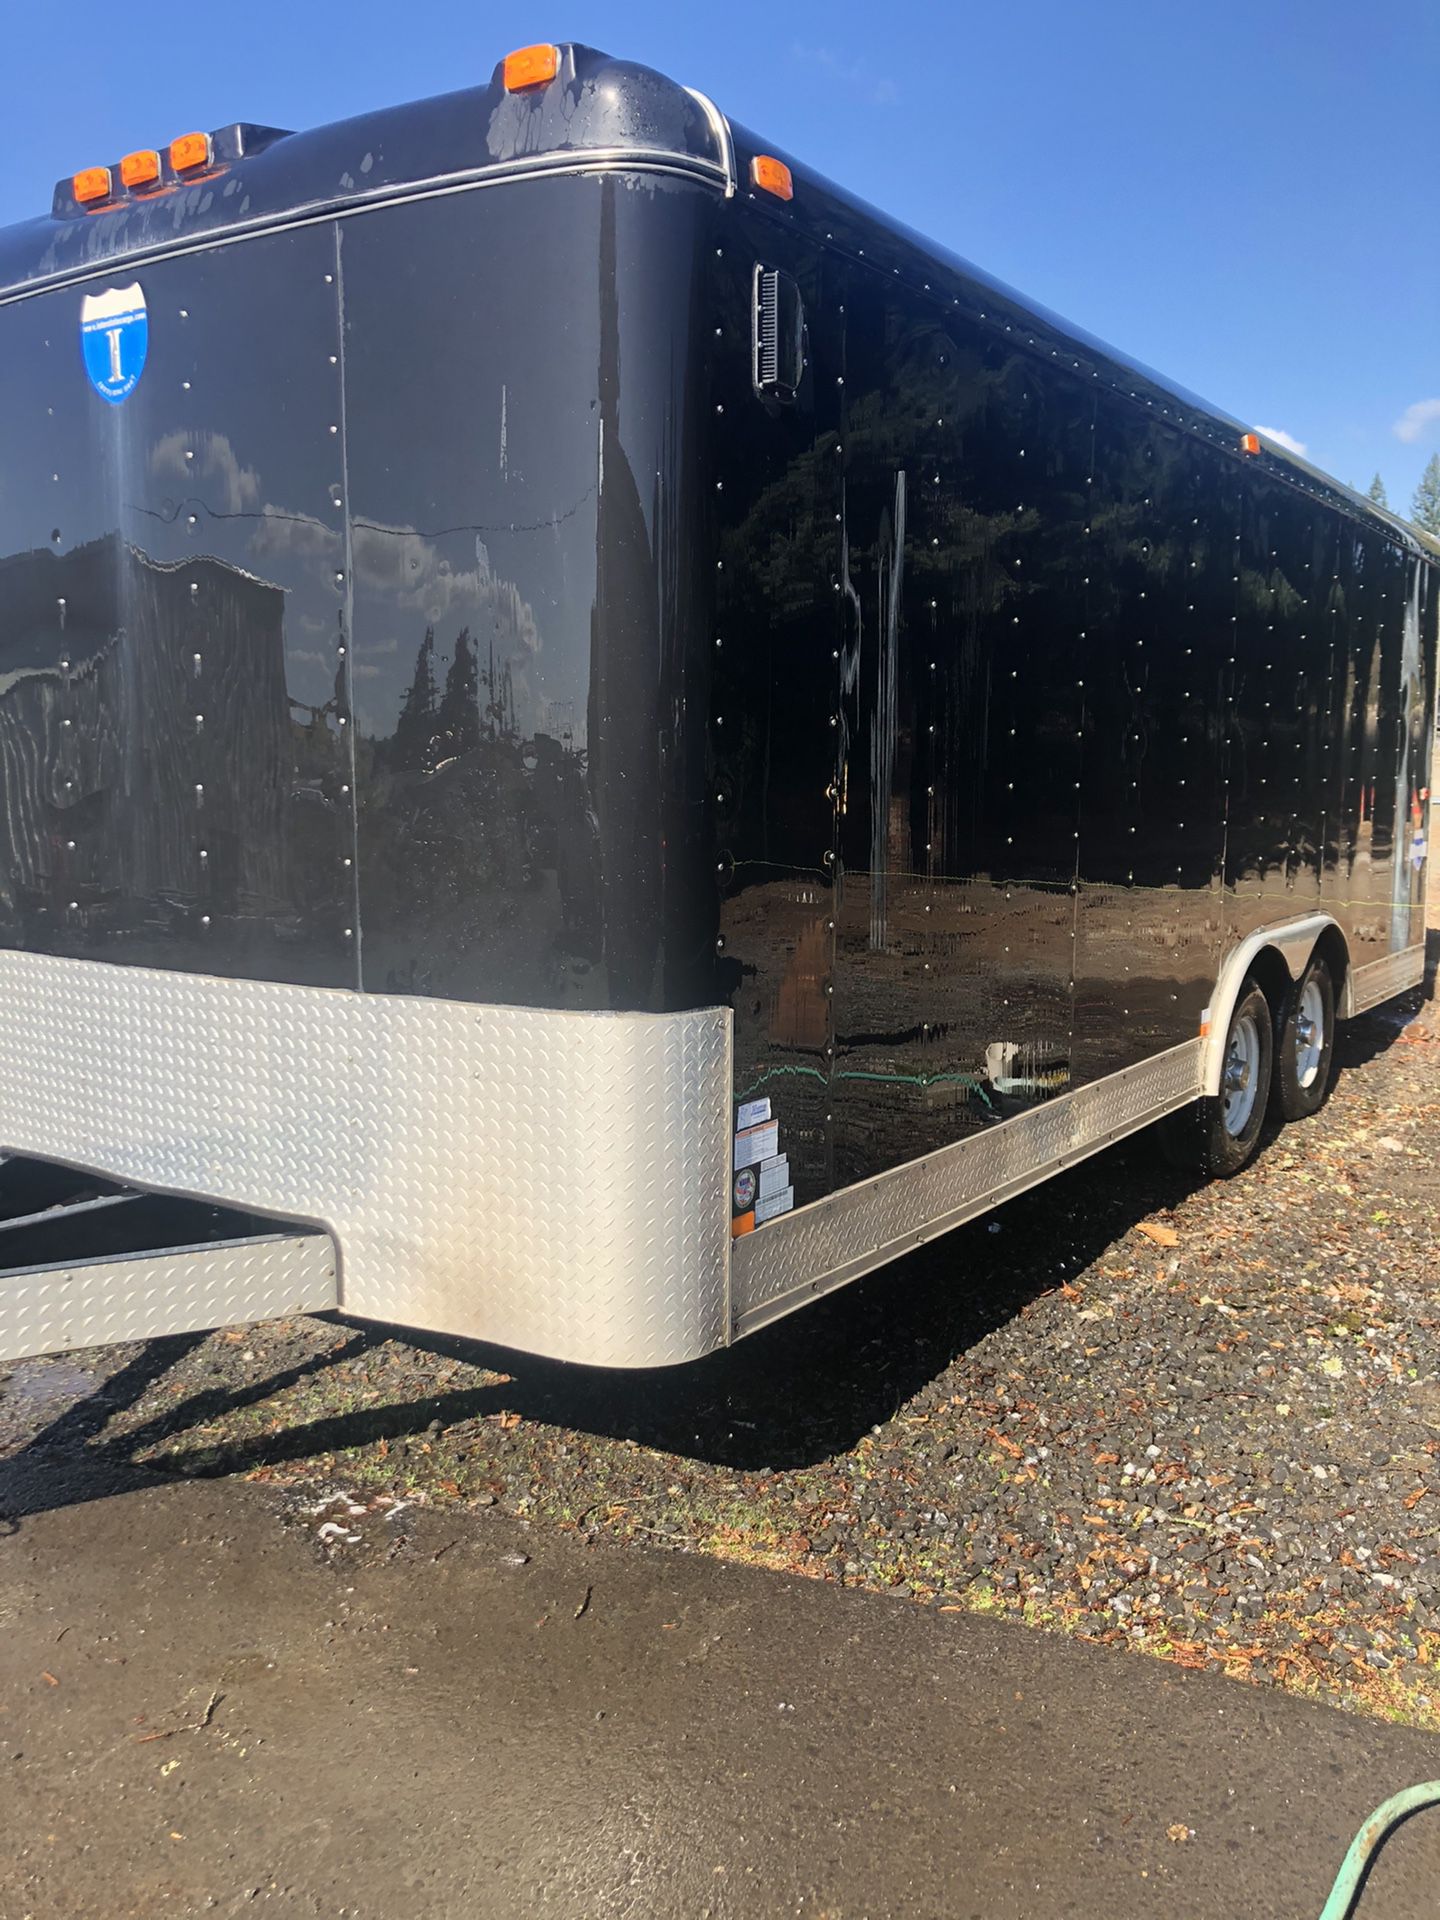 2008 interstate Pro-Series enclosed trailer 20x8x6’8”height *Sale Pending*